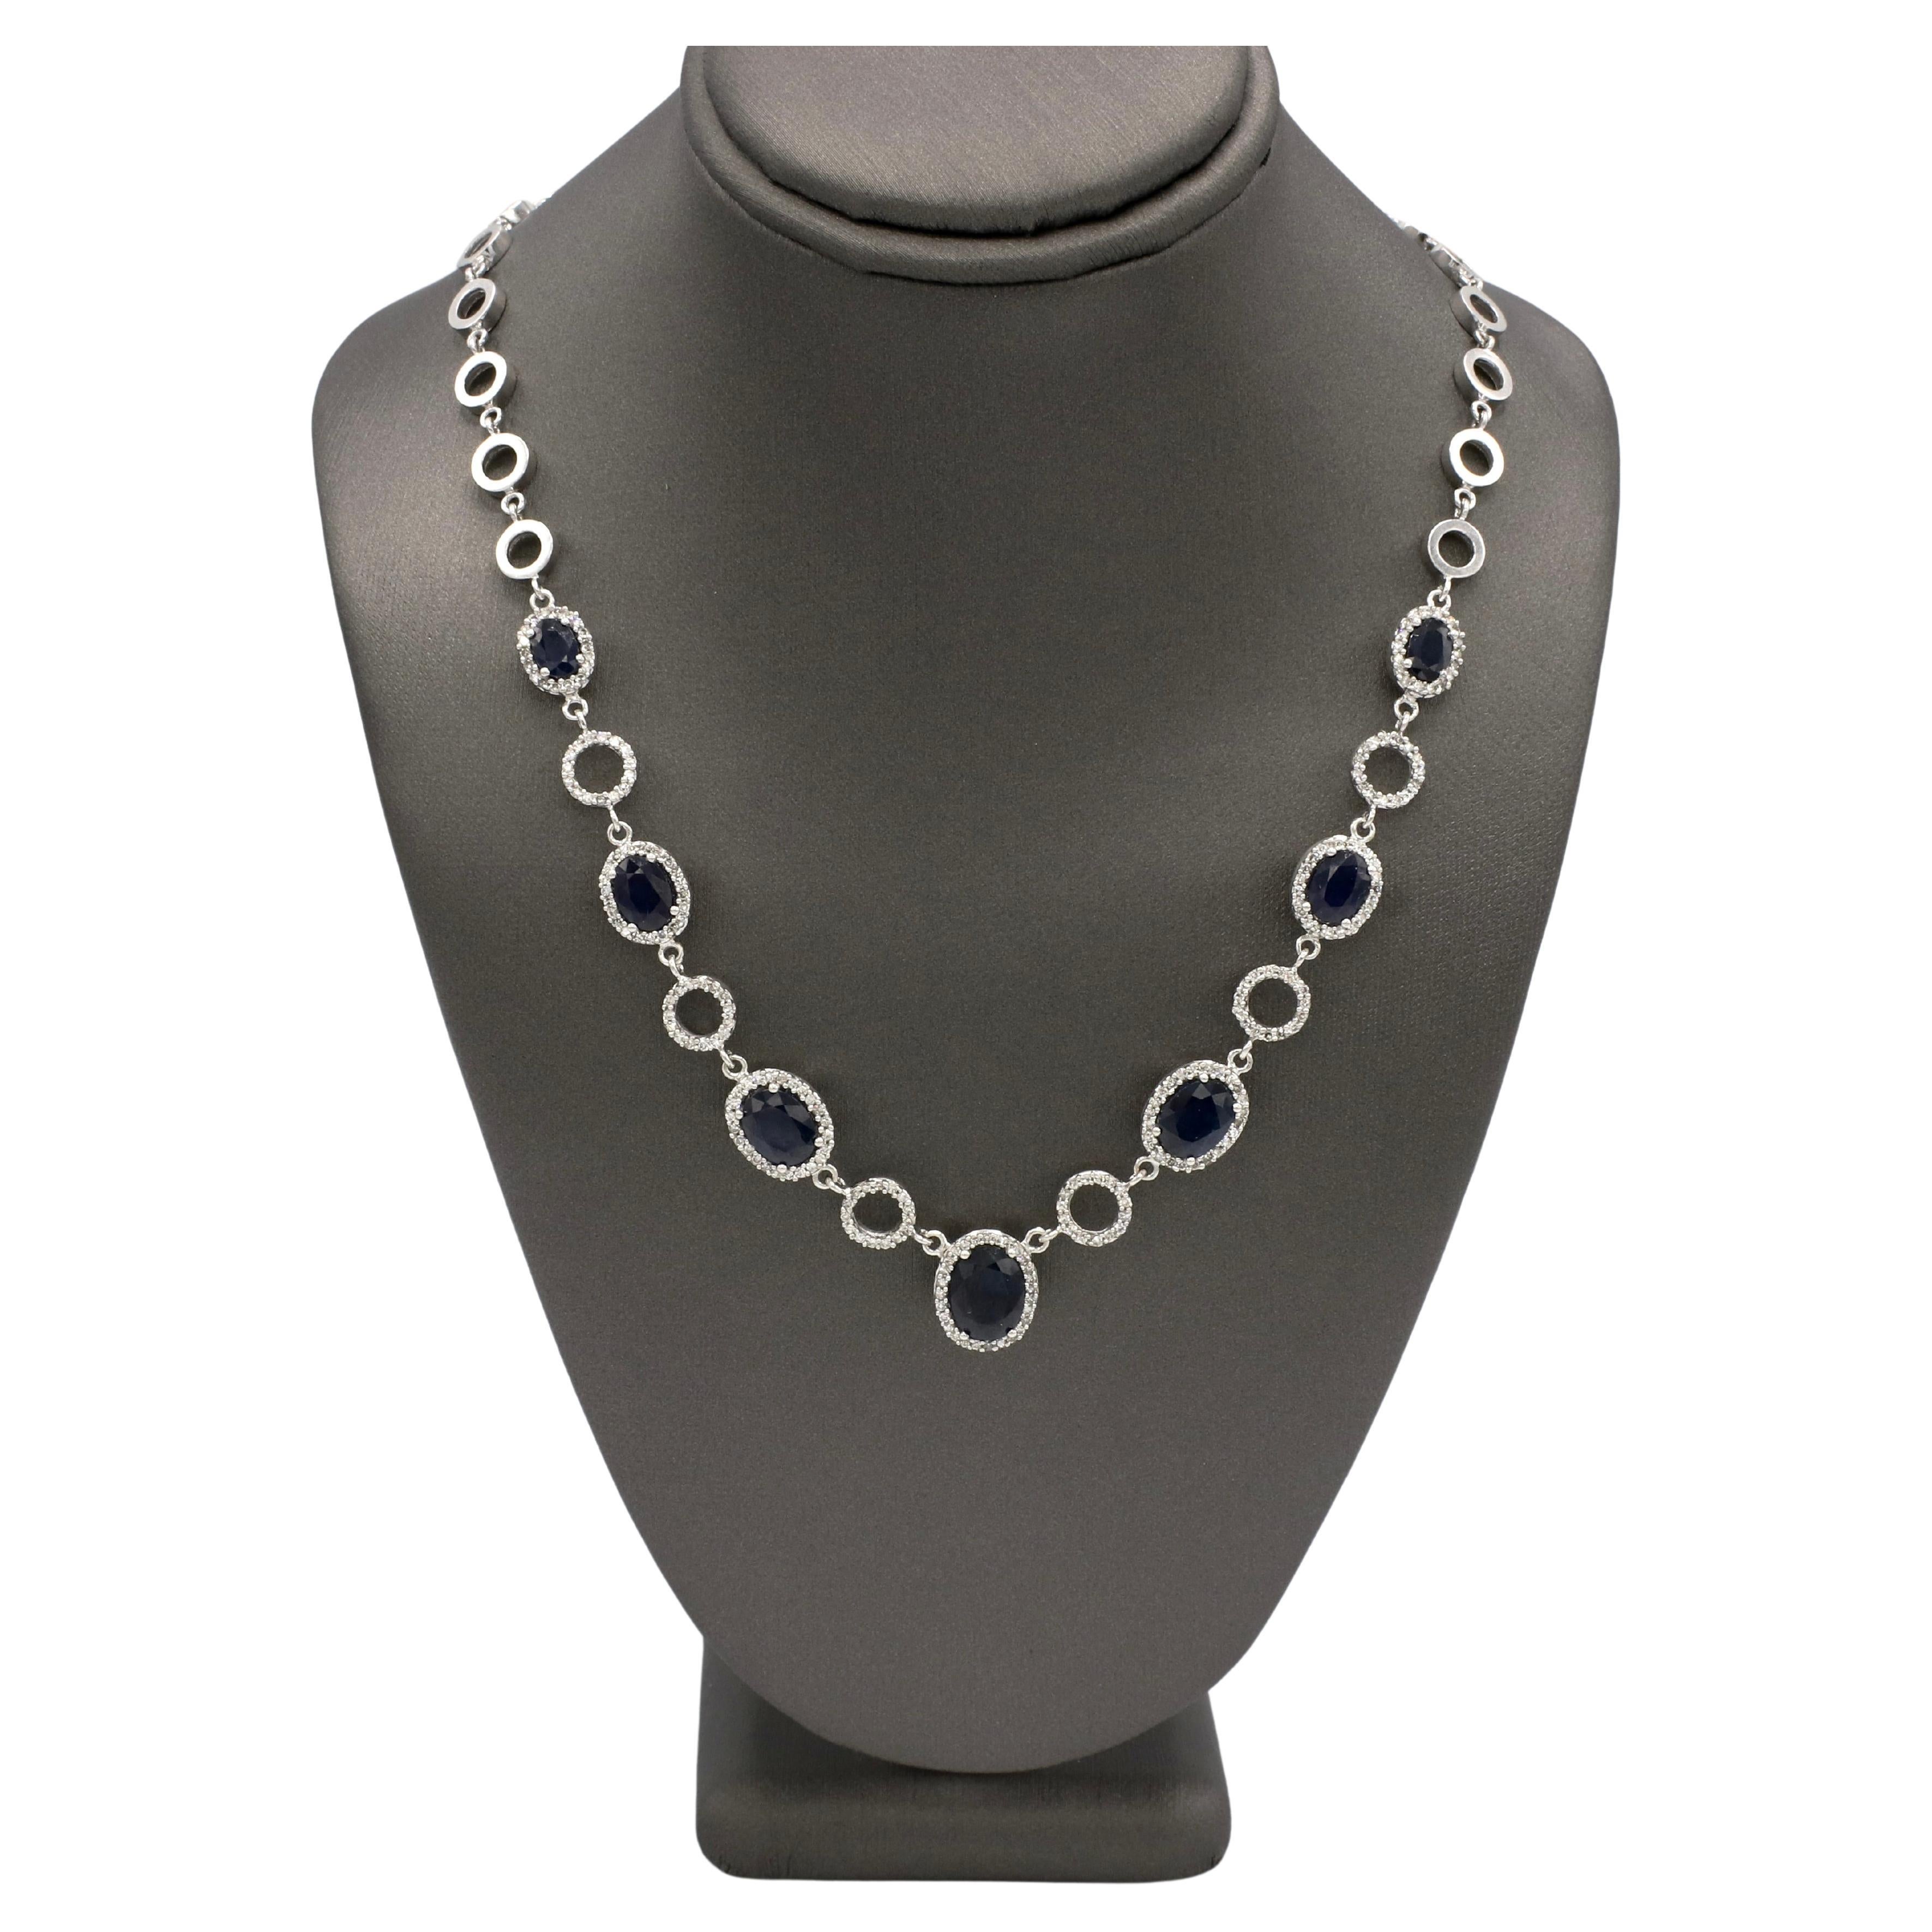 Effy 14 Karat White Gold Natural Sapphire & Diamond Station Circle Necklace 
Metal: 14k white gold
Weight: 23.32 grams
Length: 16.5 inches
Sapphires: 7 natural oval blue sapphires, approx. 9.50 carats
Diamonds: Approx. 0.90 CTW round natural